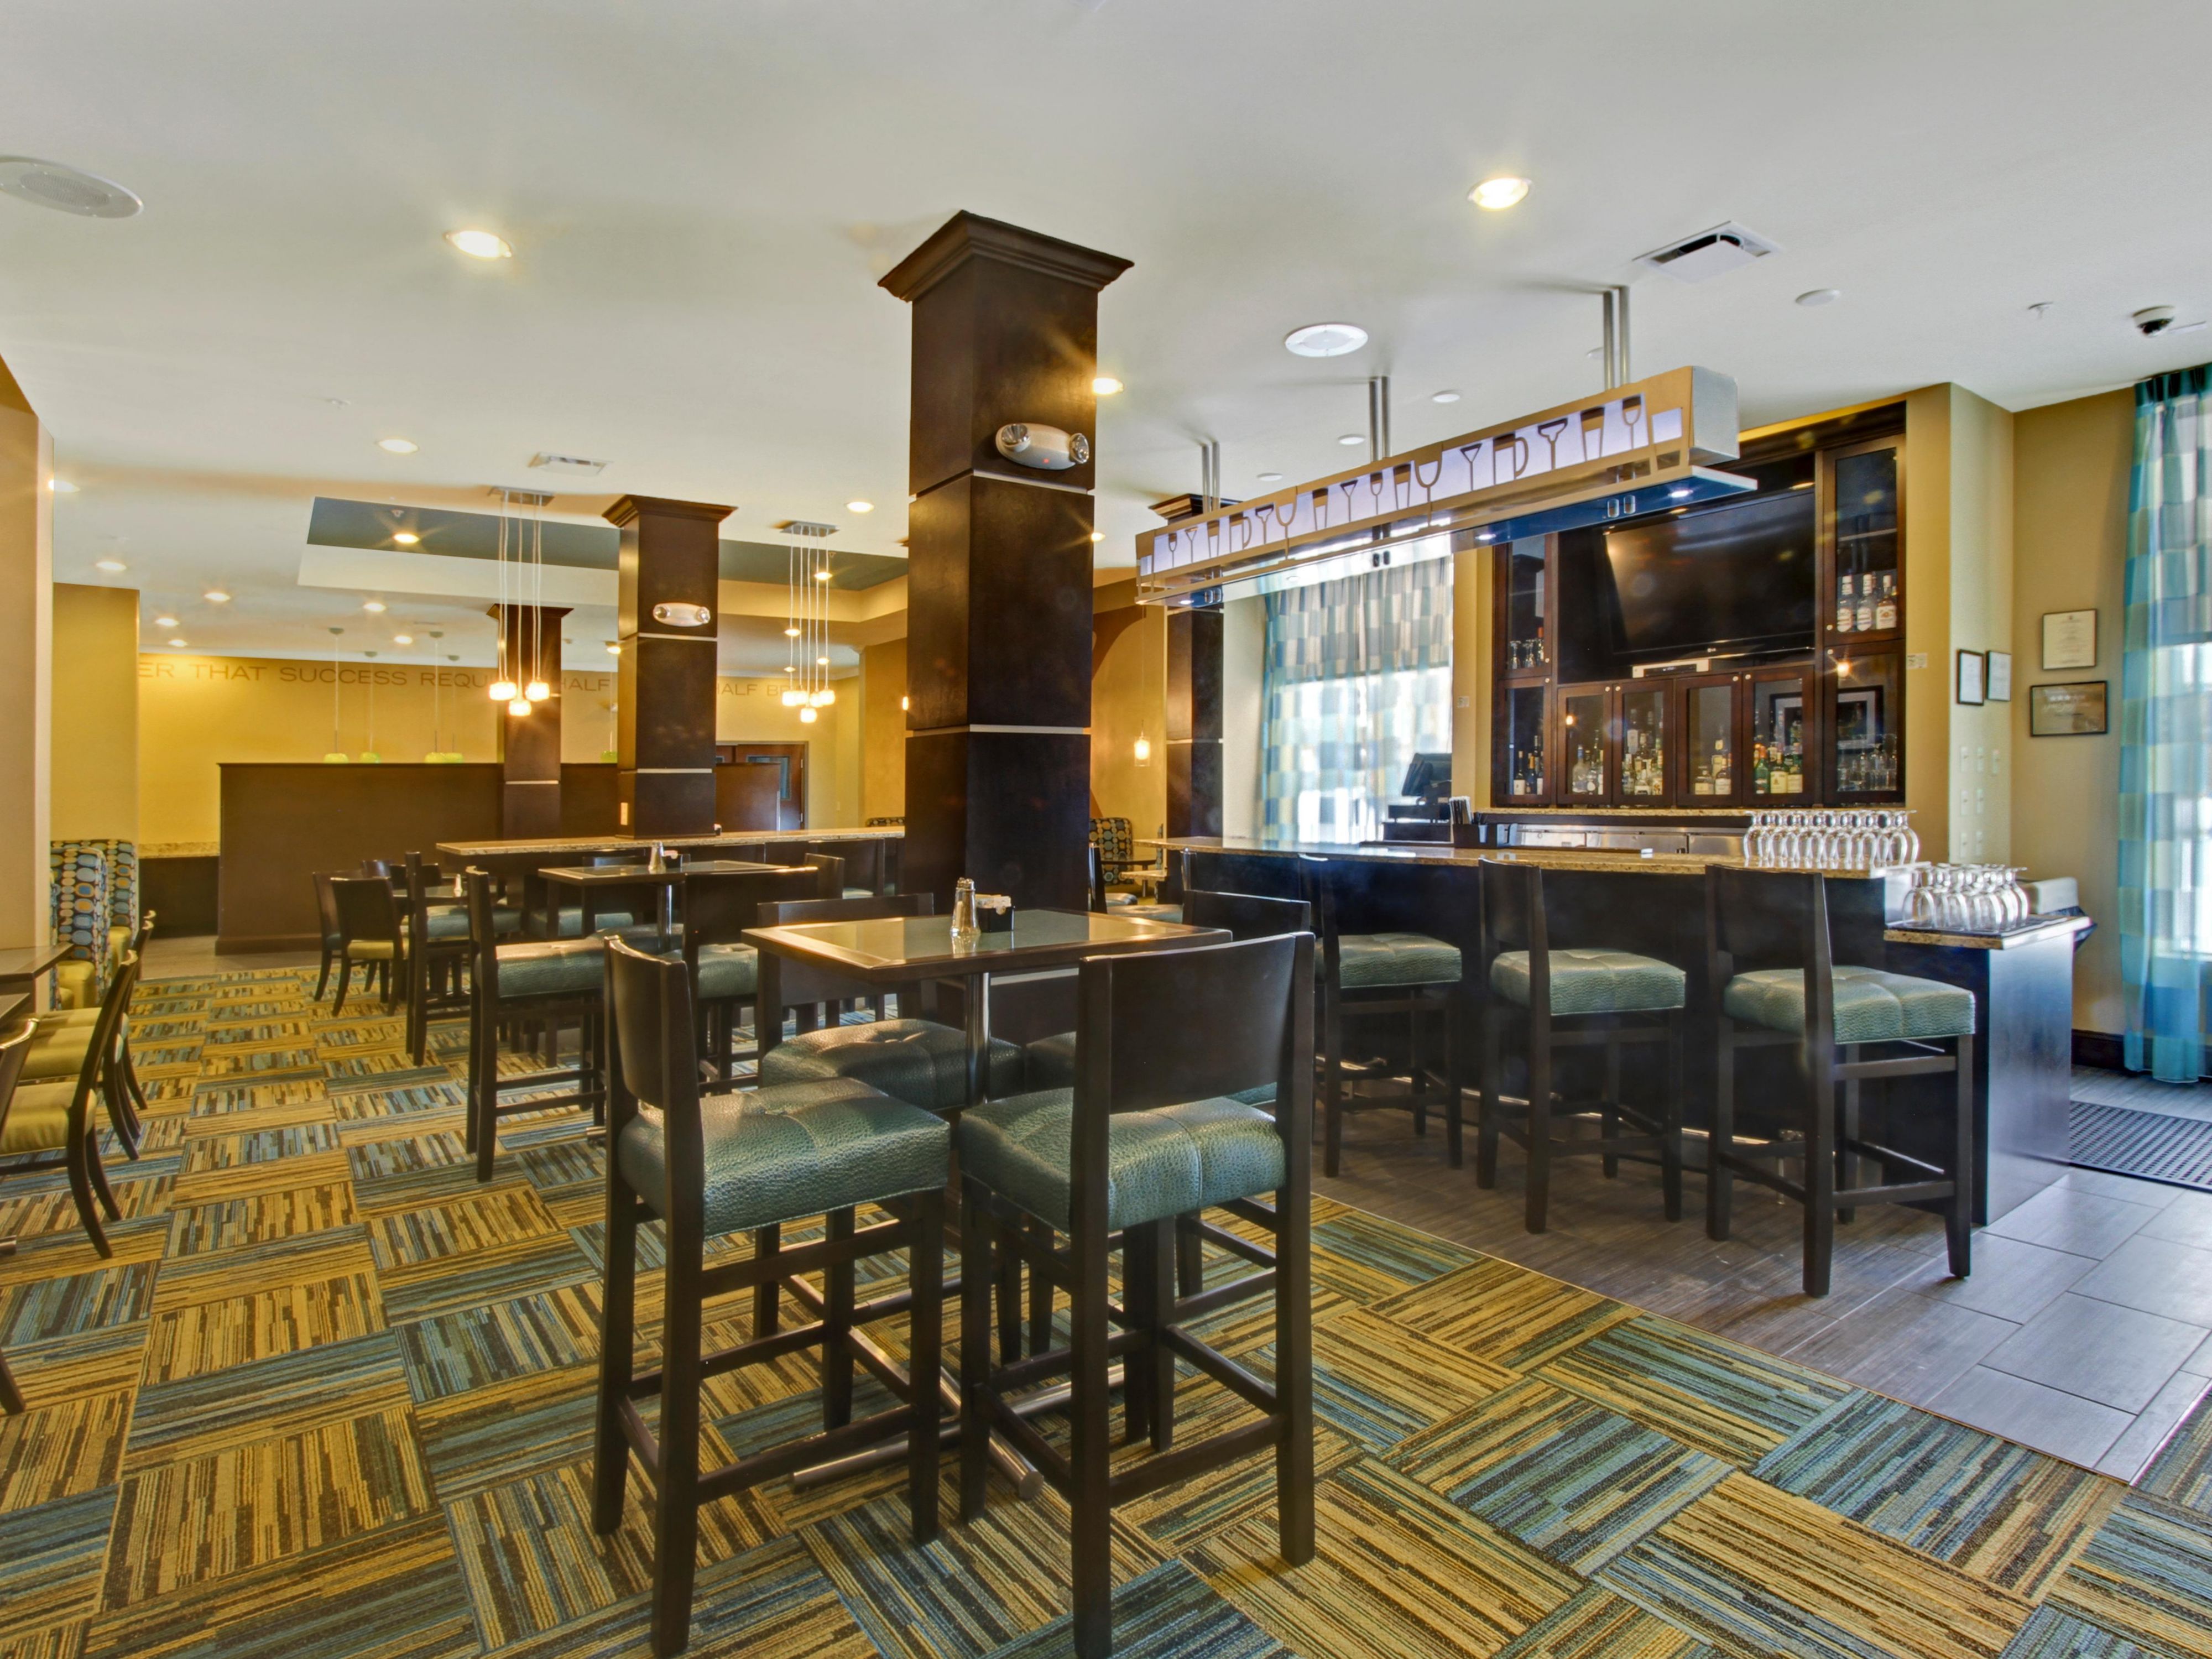 Kem's Restaurant/Lounge seats up to 45, providing breakfast and dinner 7 days a week. Every Wednesday Night, we have the Manager's Reception in our restaurant for all of our guests. Room service is available, and be sure to check out our nightly specials!